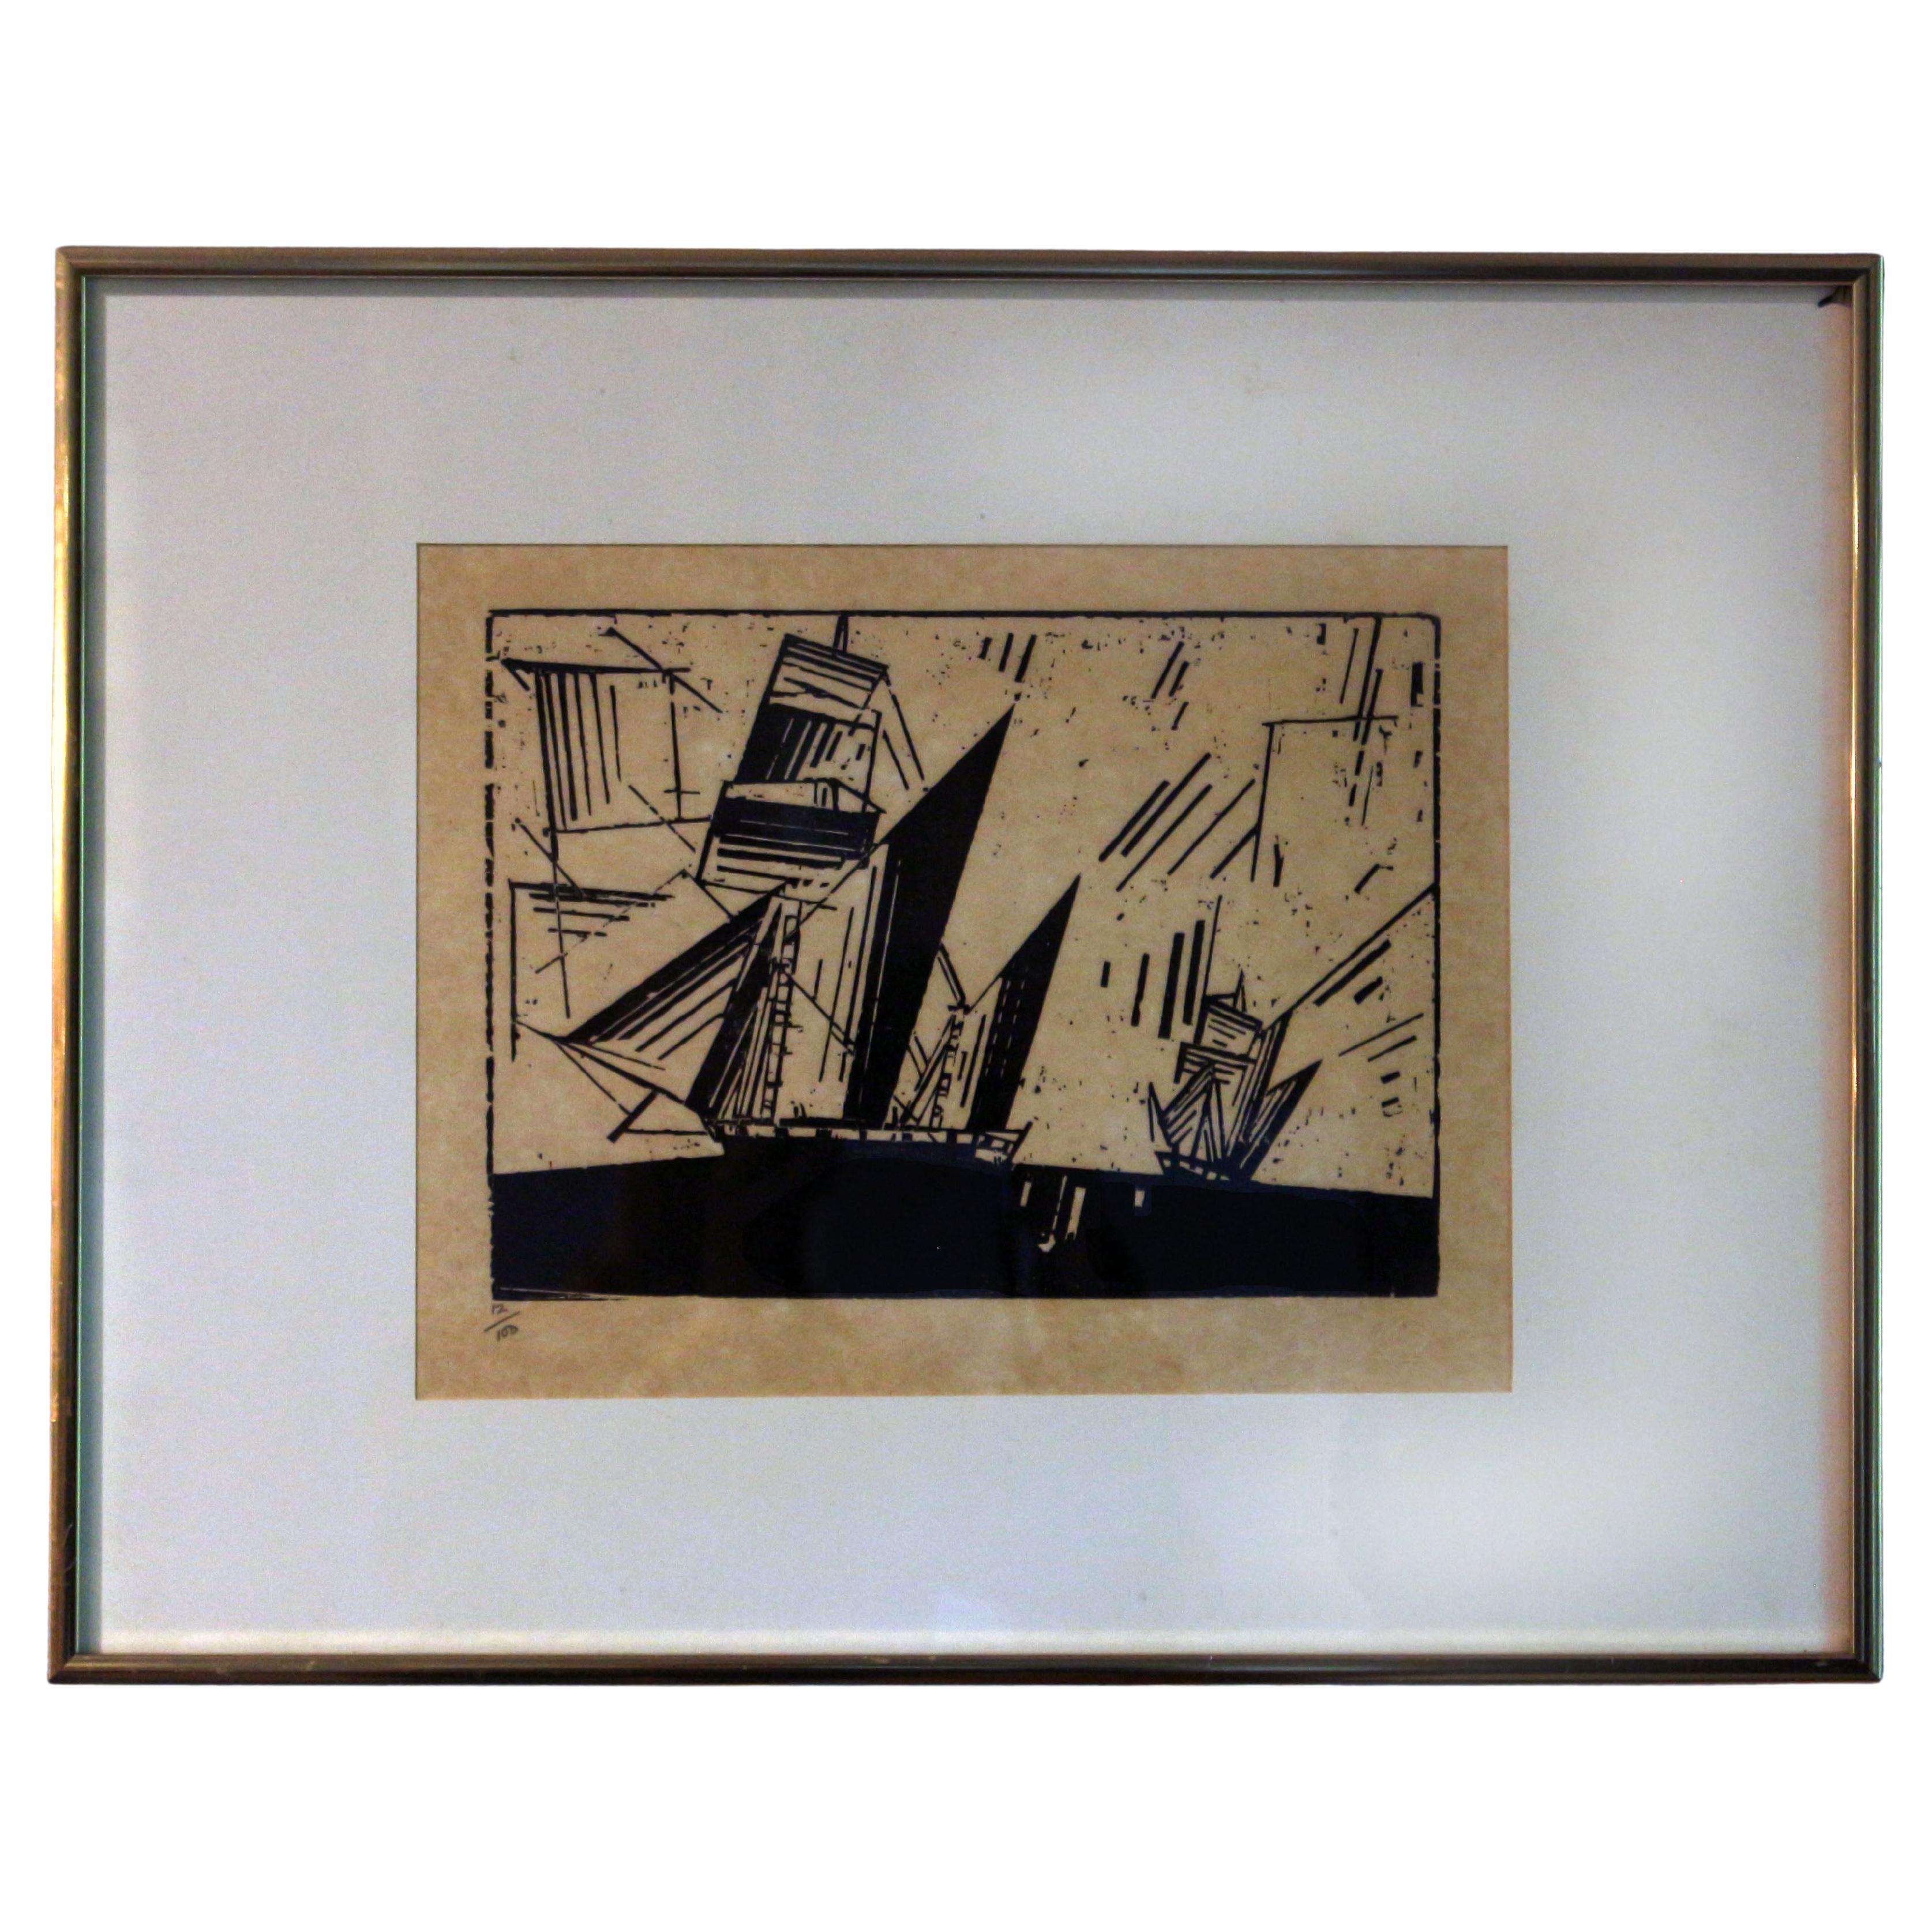 1964 Woodcut Print "Topsail Ketches" by Lyonel Feininger For Sale